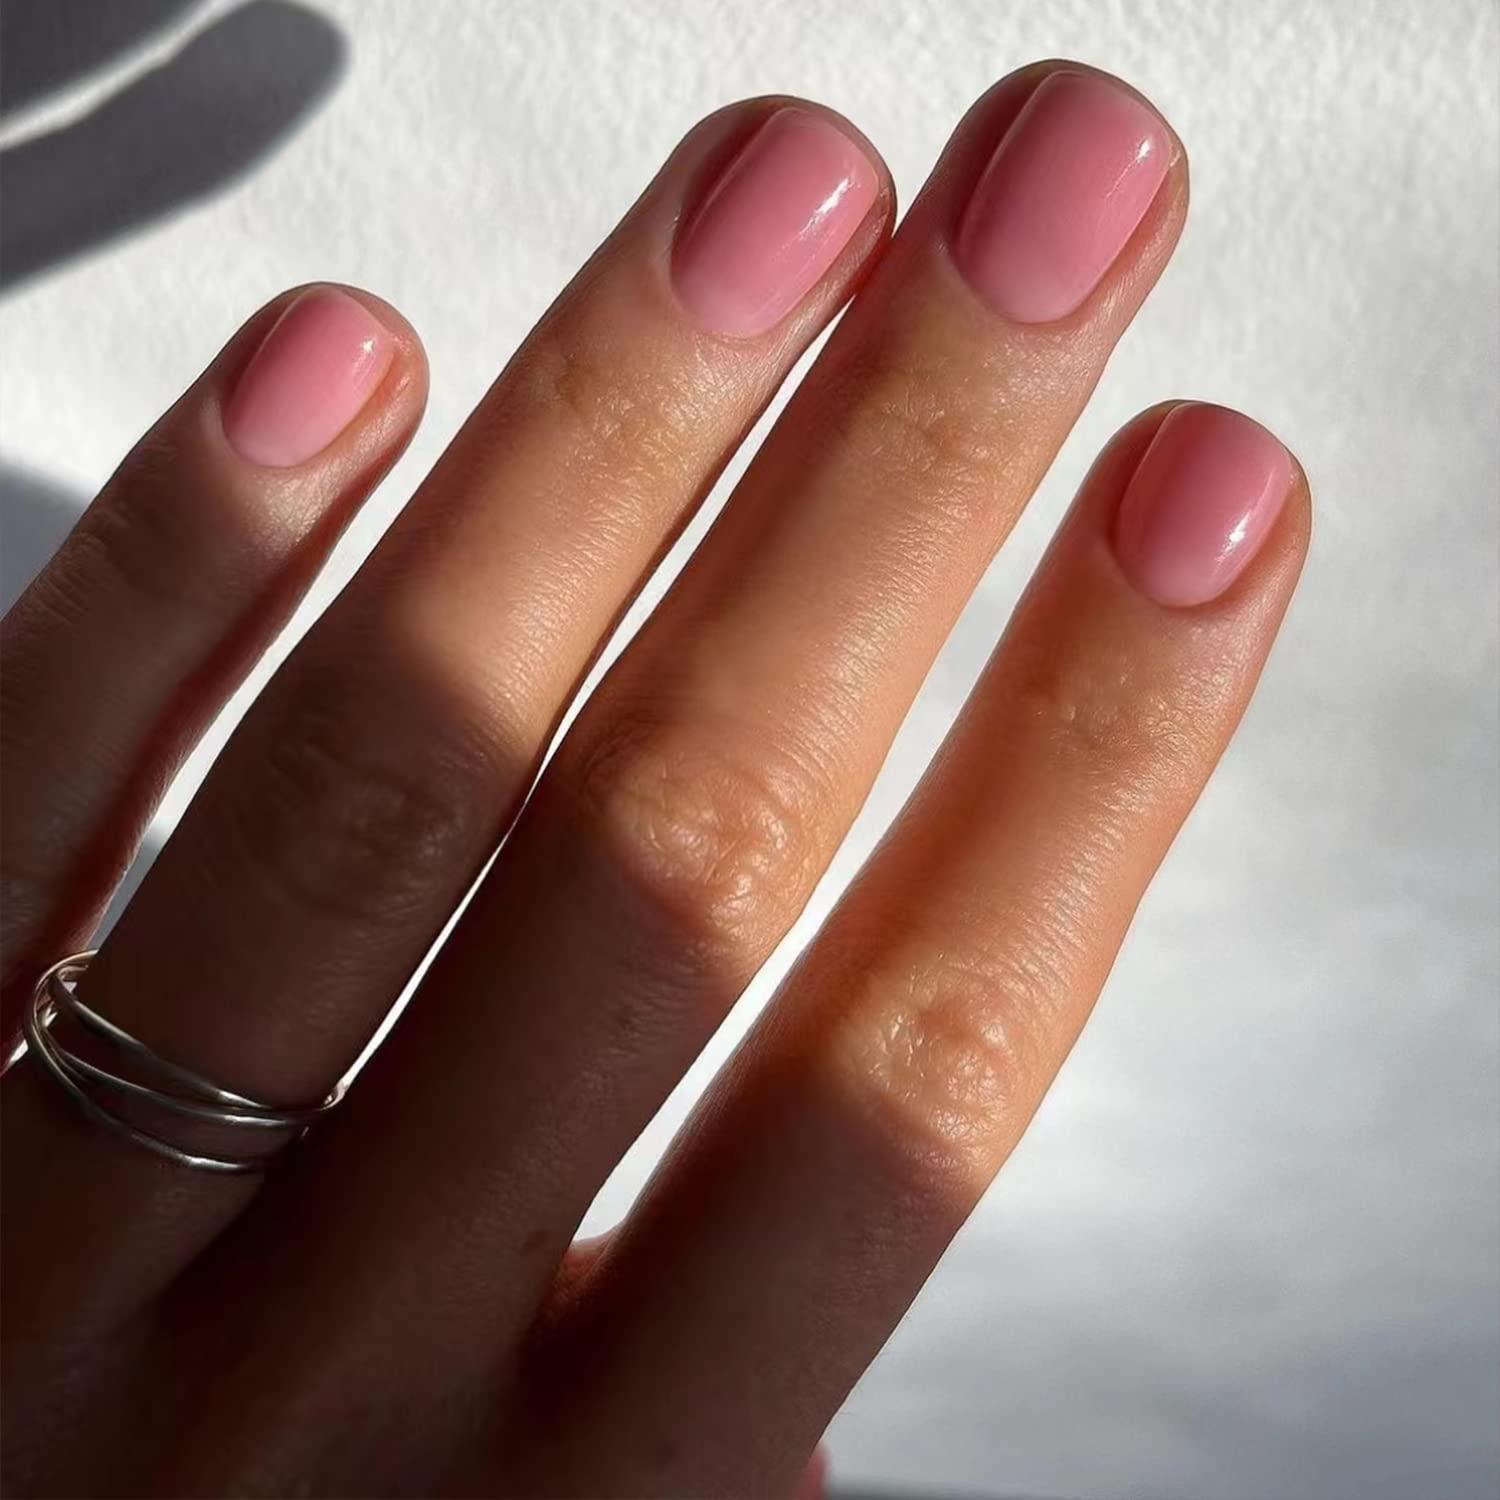 Clean Nails Short Press on Nails Berry Pink Petite Fake Nails Glossy Pure  Color False Nails Reusable Nude Artificial Nails Short Round Nails for  Small Hands Acrylic Full Cover Gel Press-On Nail